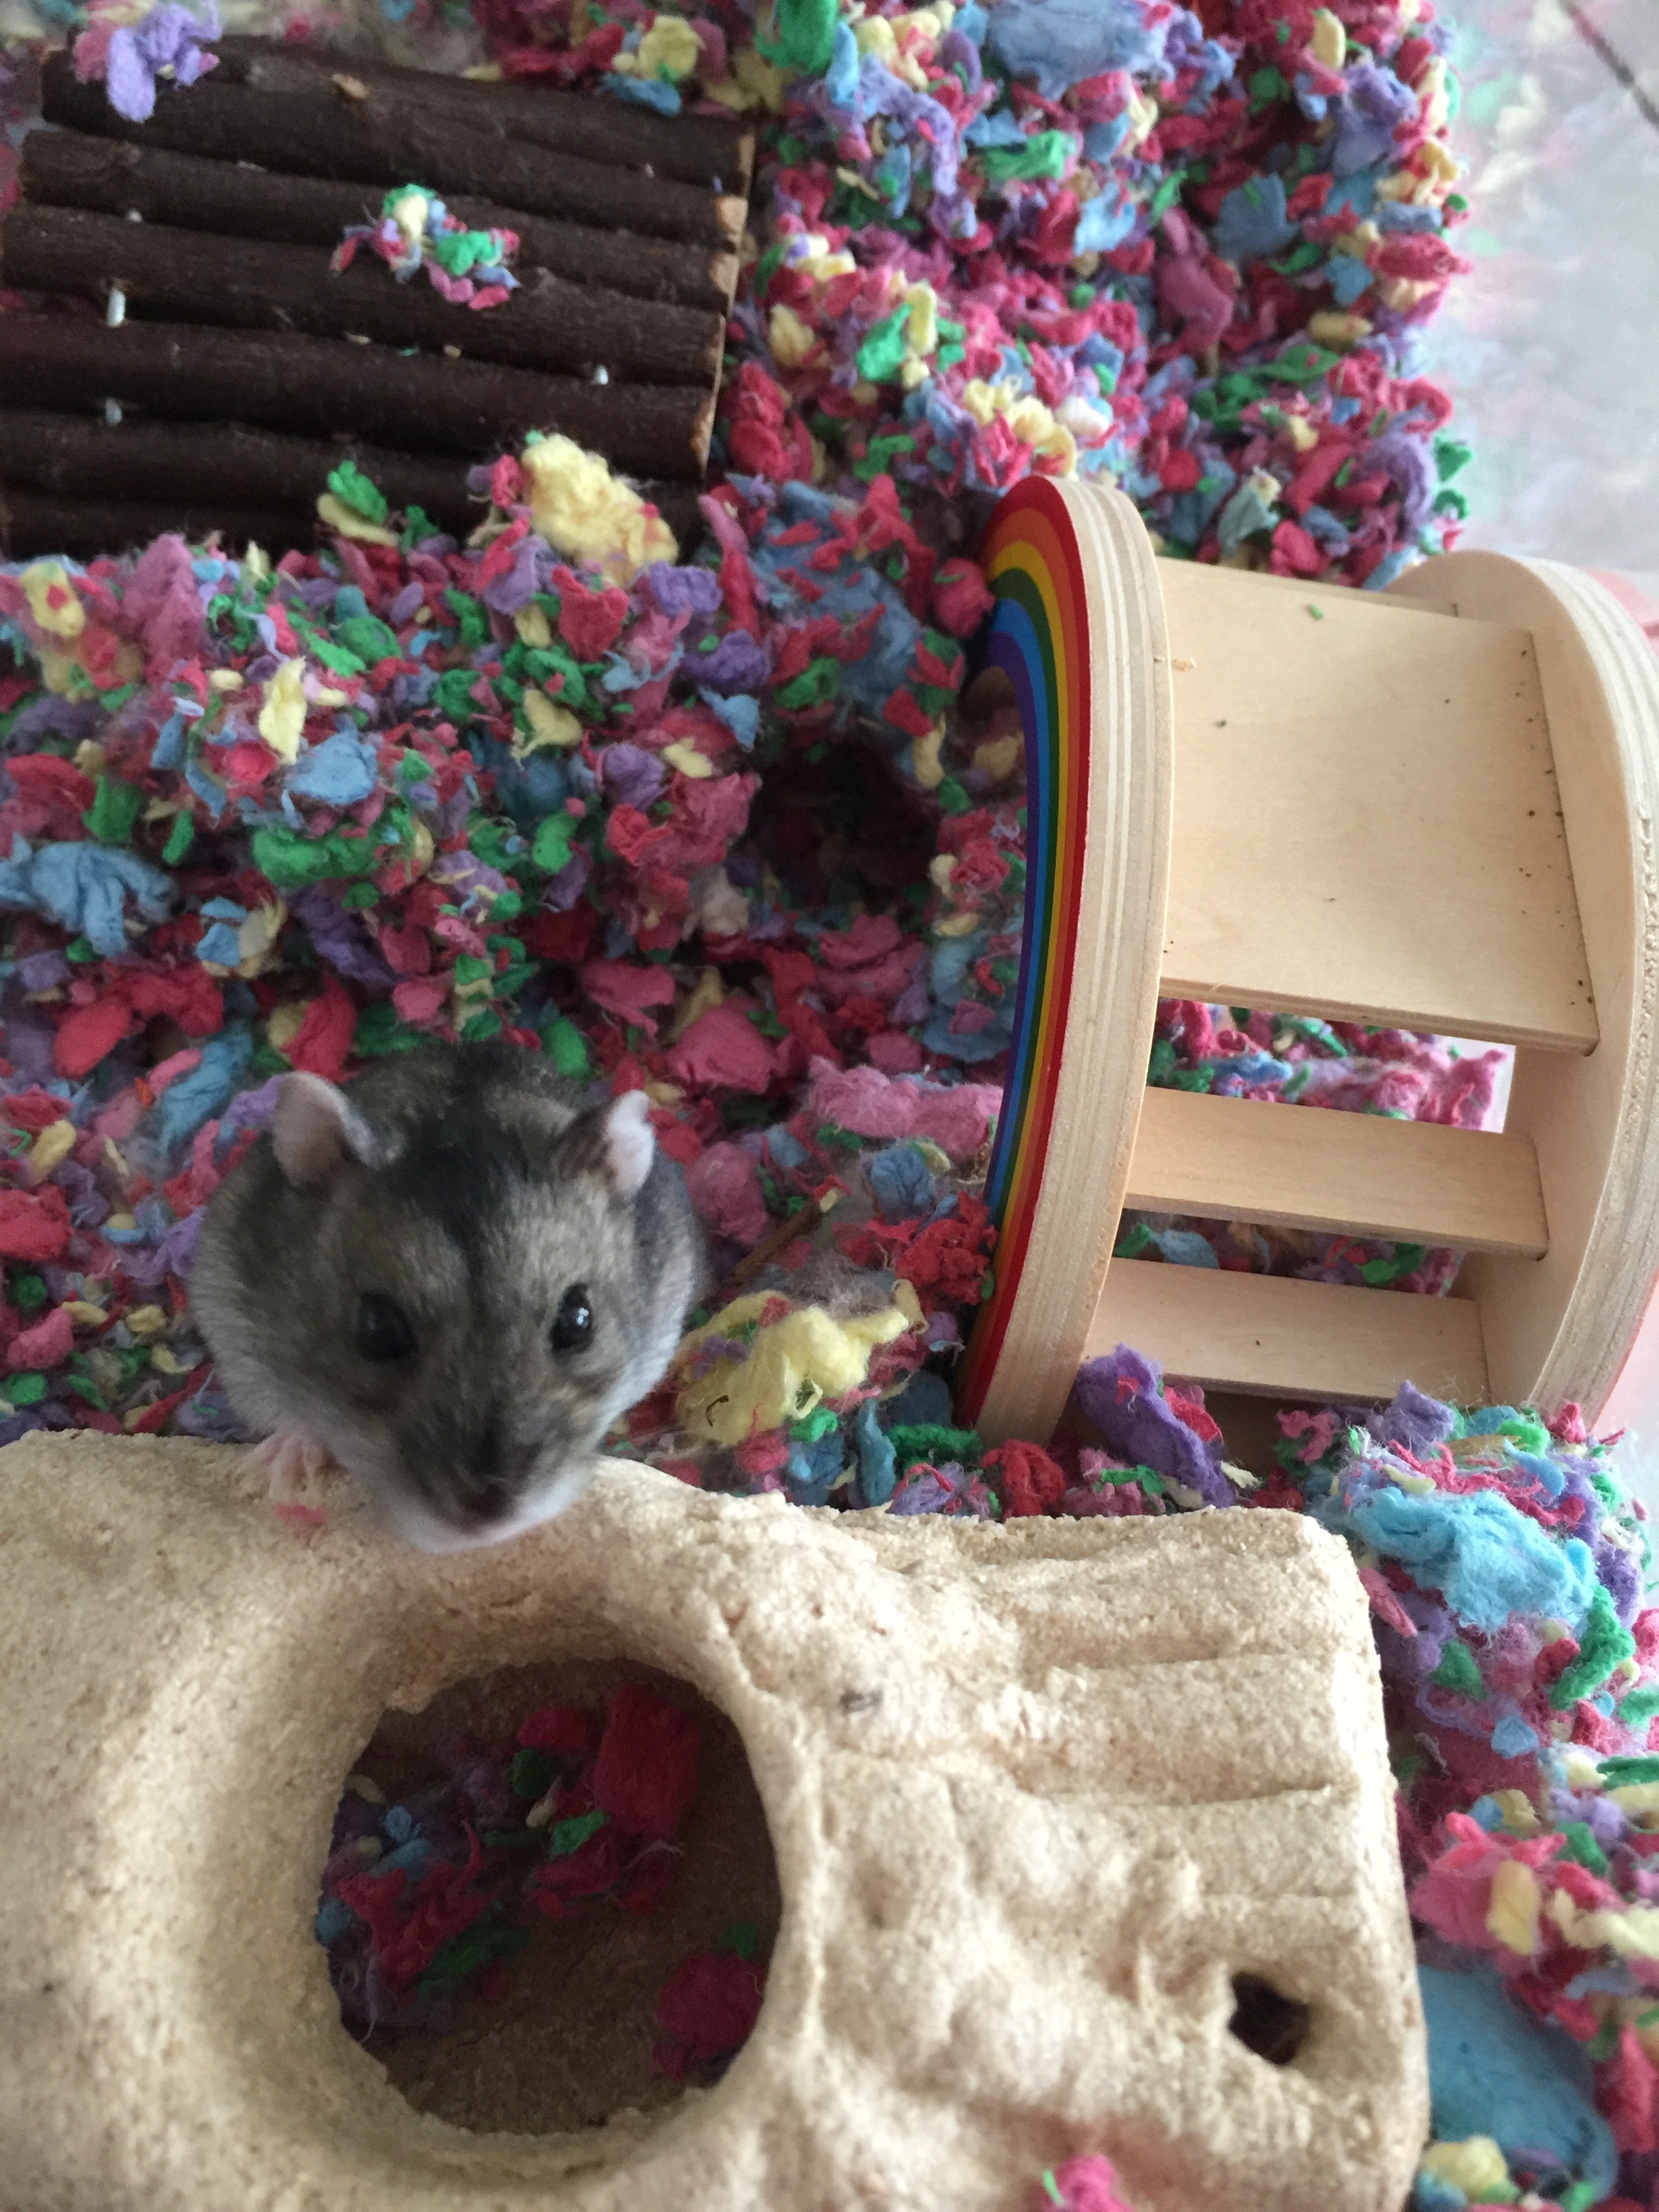 Our flock hamster 